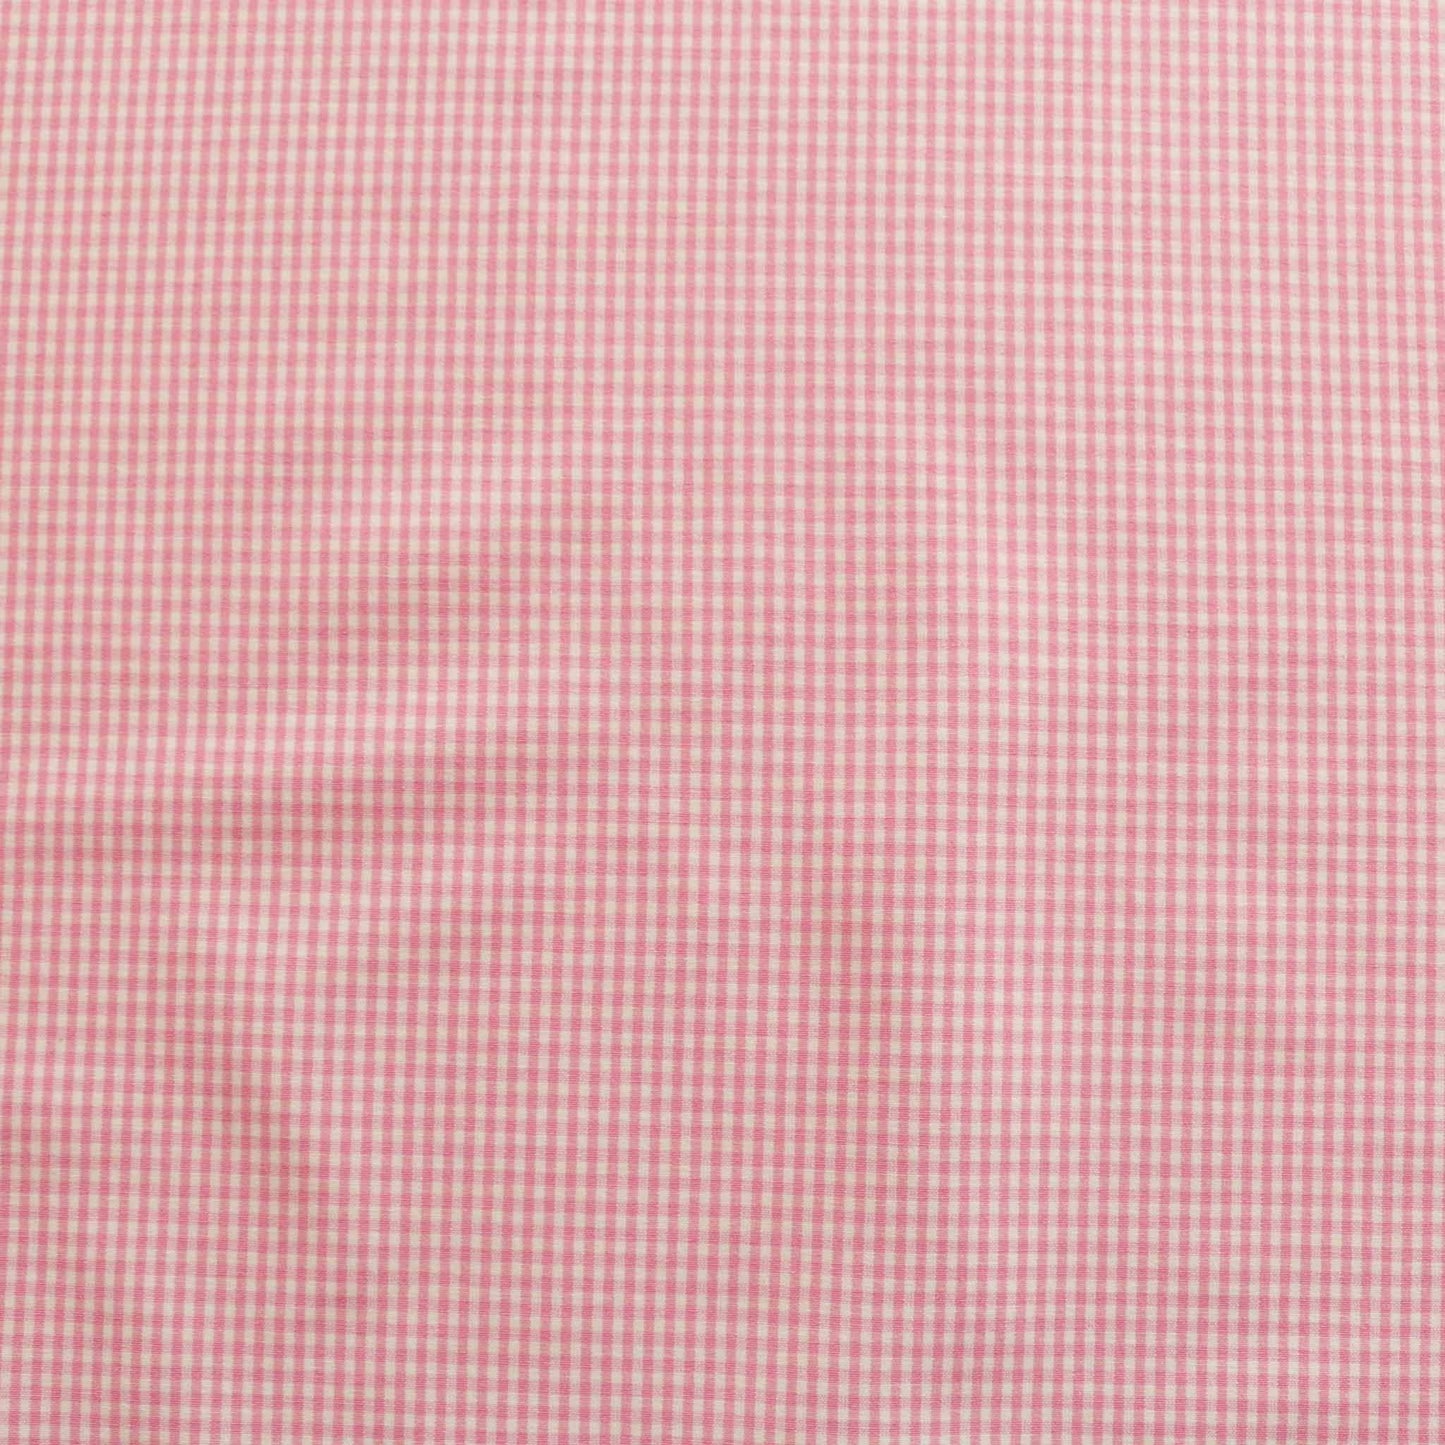 bengaline gingham check pink and white dressmaking suiting fabric